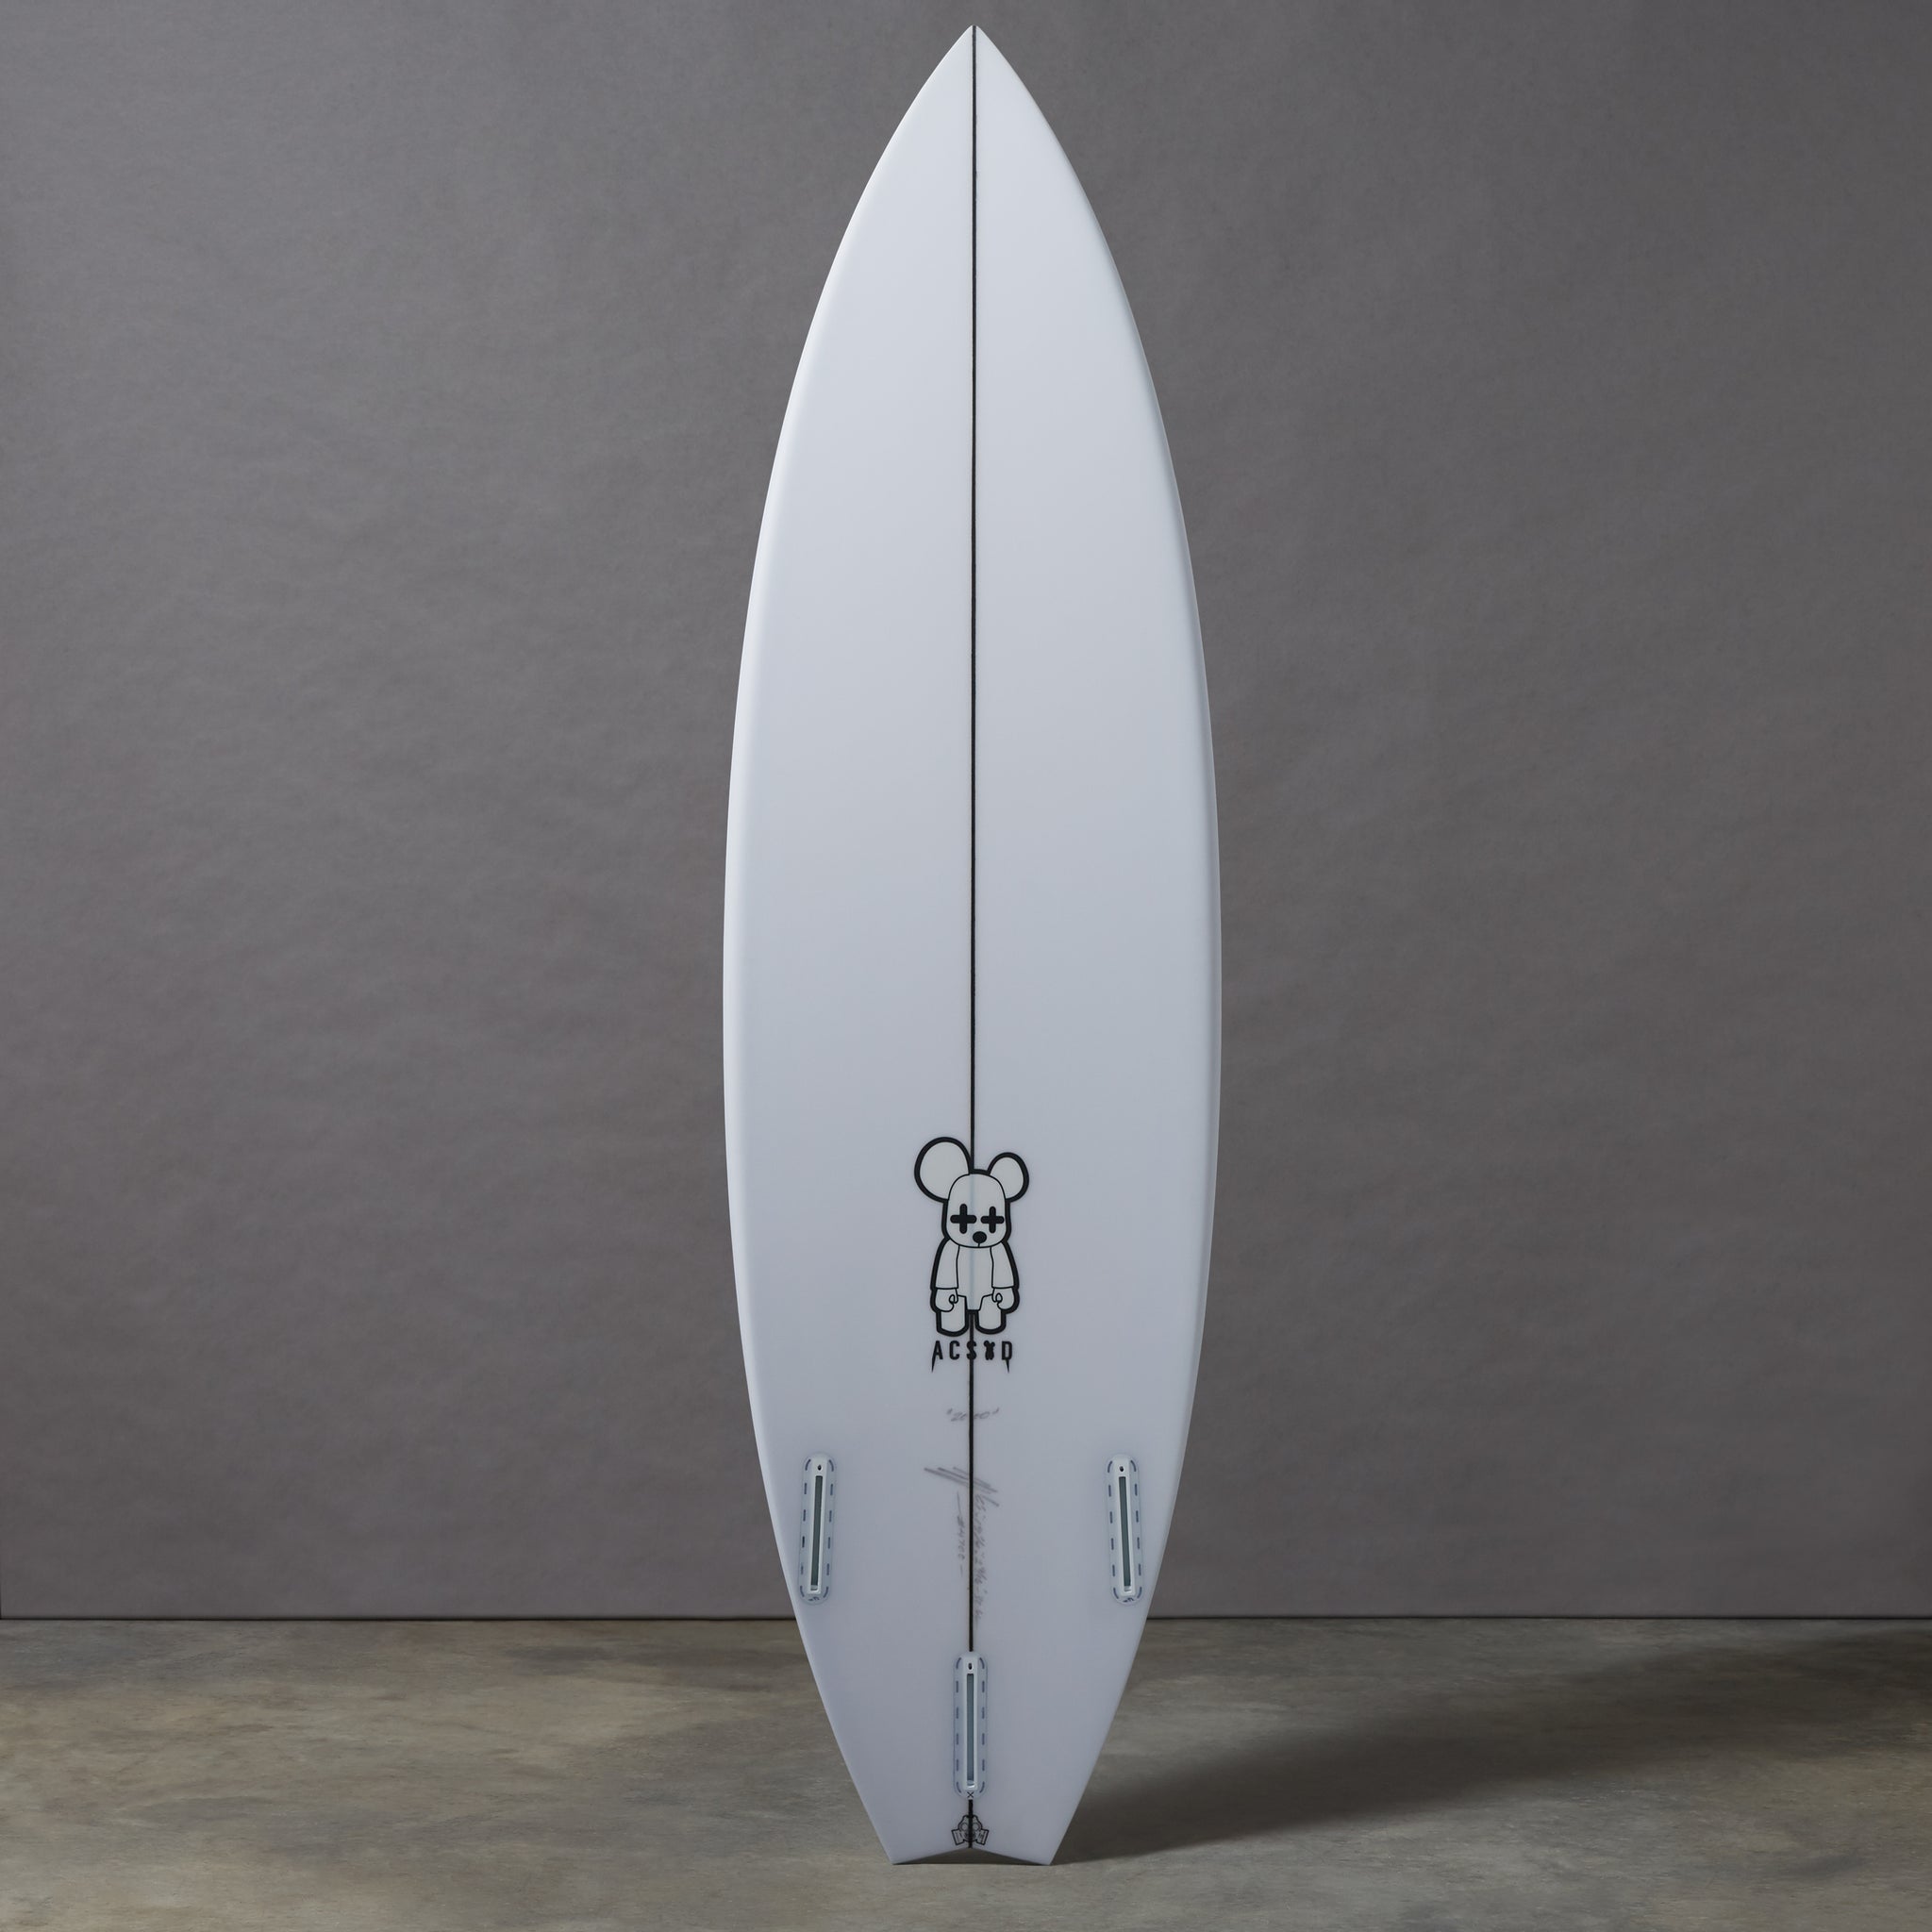 A C S O D Surfboards – ACSOD Surfboards